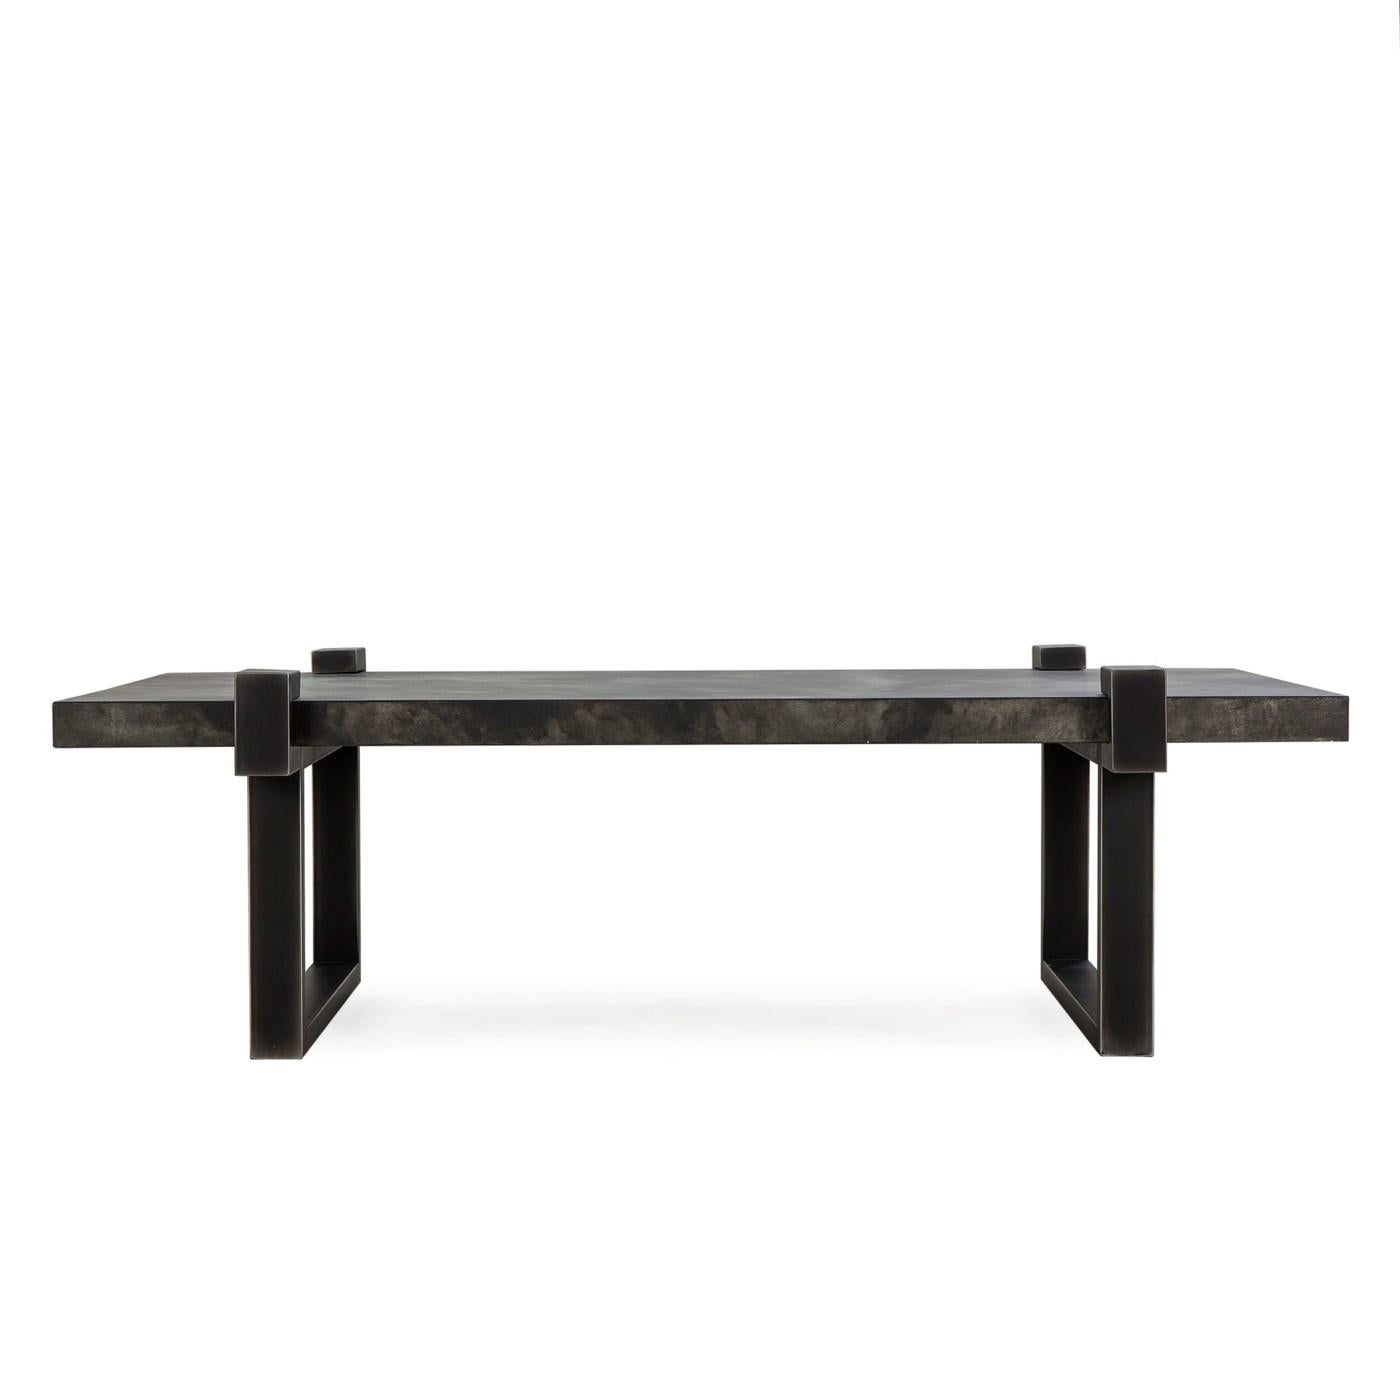 hand-hammered metal cocktail table featuring a thick blackened metal top paired with a metal base.
The simple Industrial chic design adds a contemporary touch in the space.
Product dimensions:
Inches: 55 x 31.5 x 17
Materials: Hammered metal